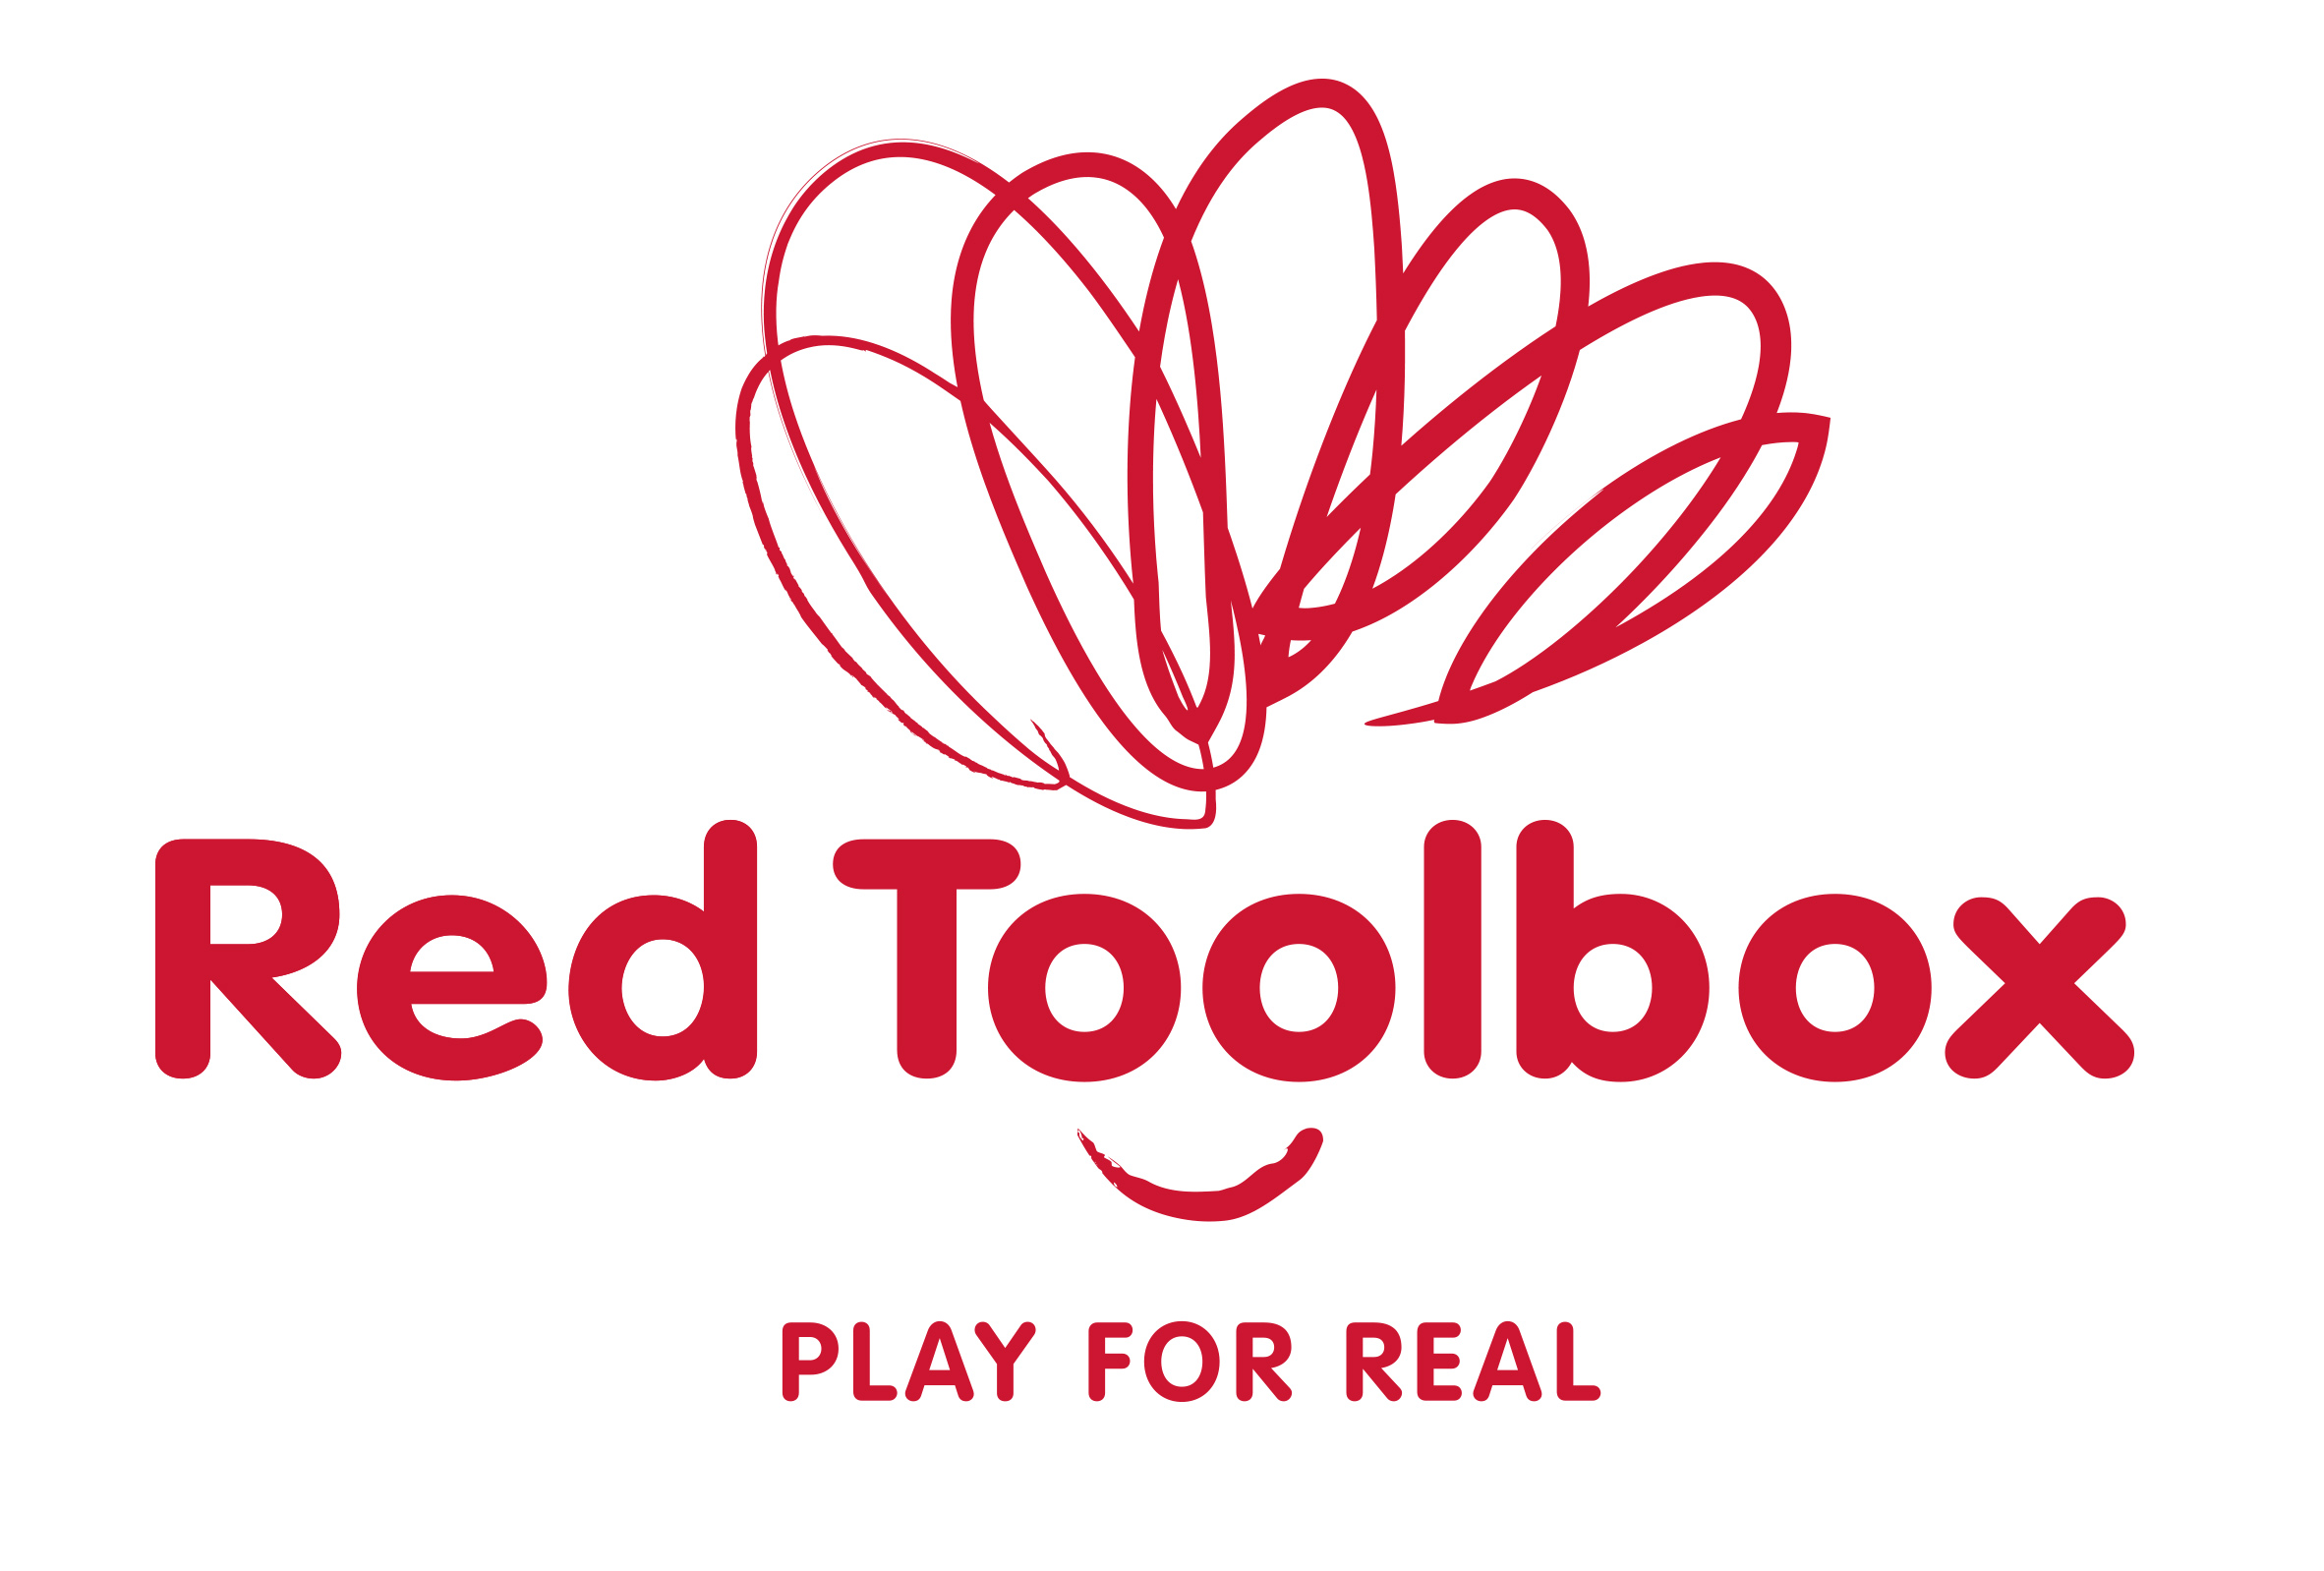 Red Toolbox - Play for Real!